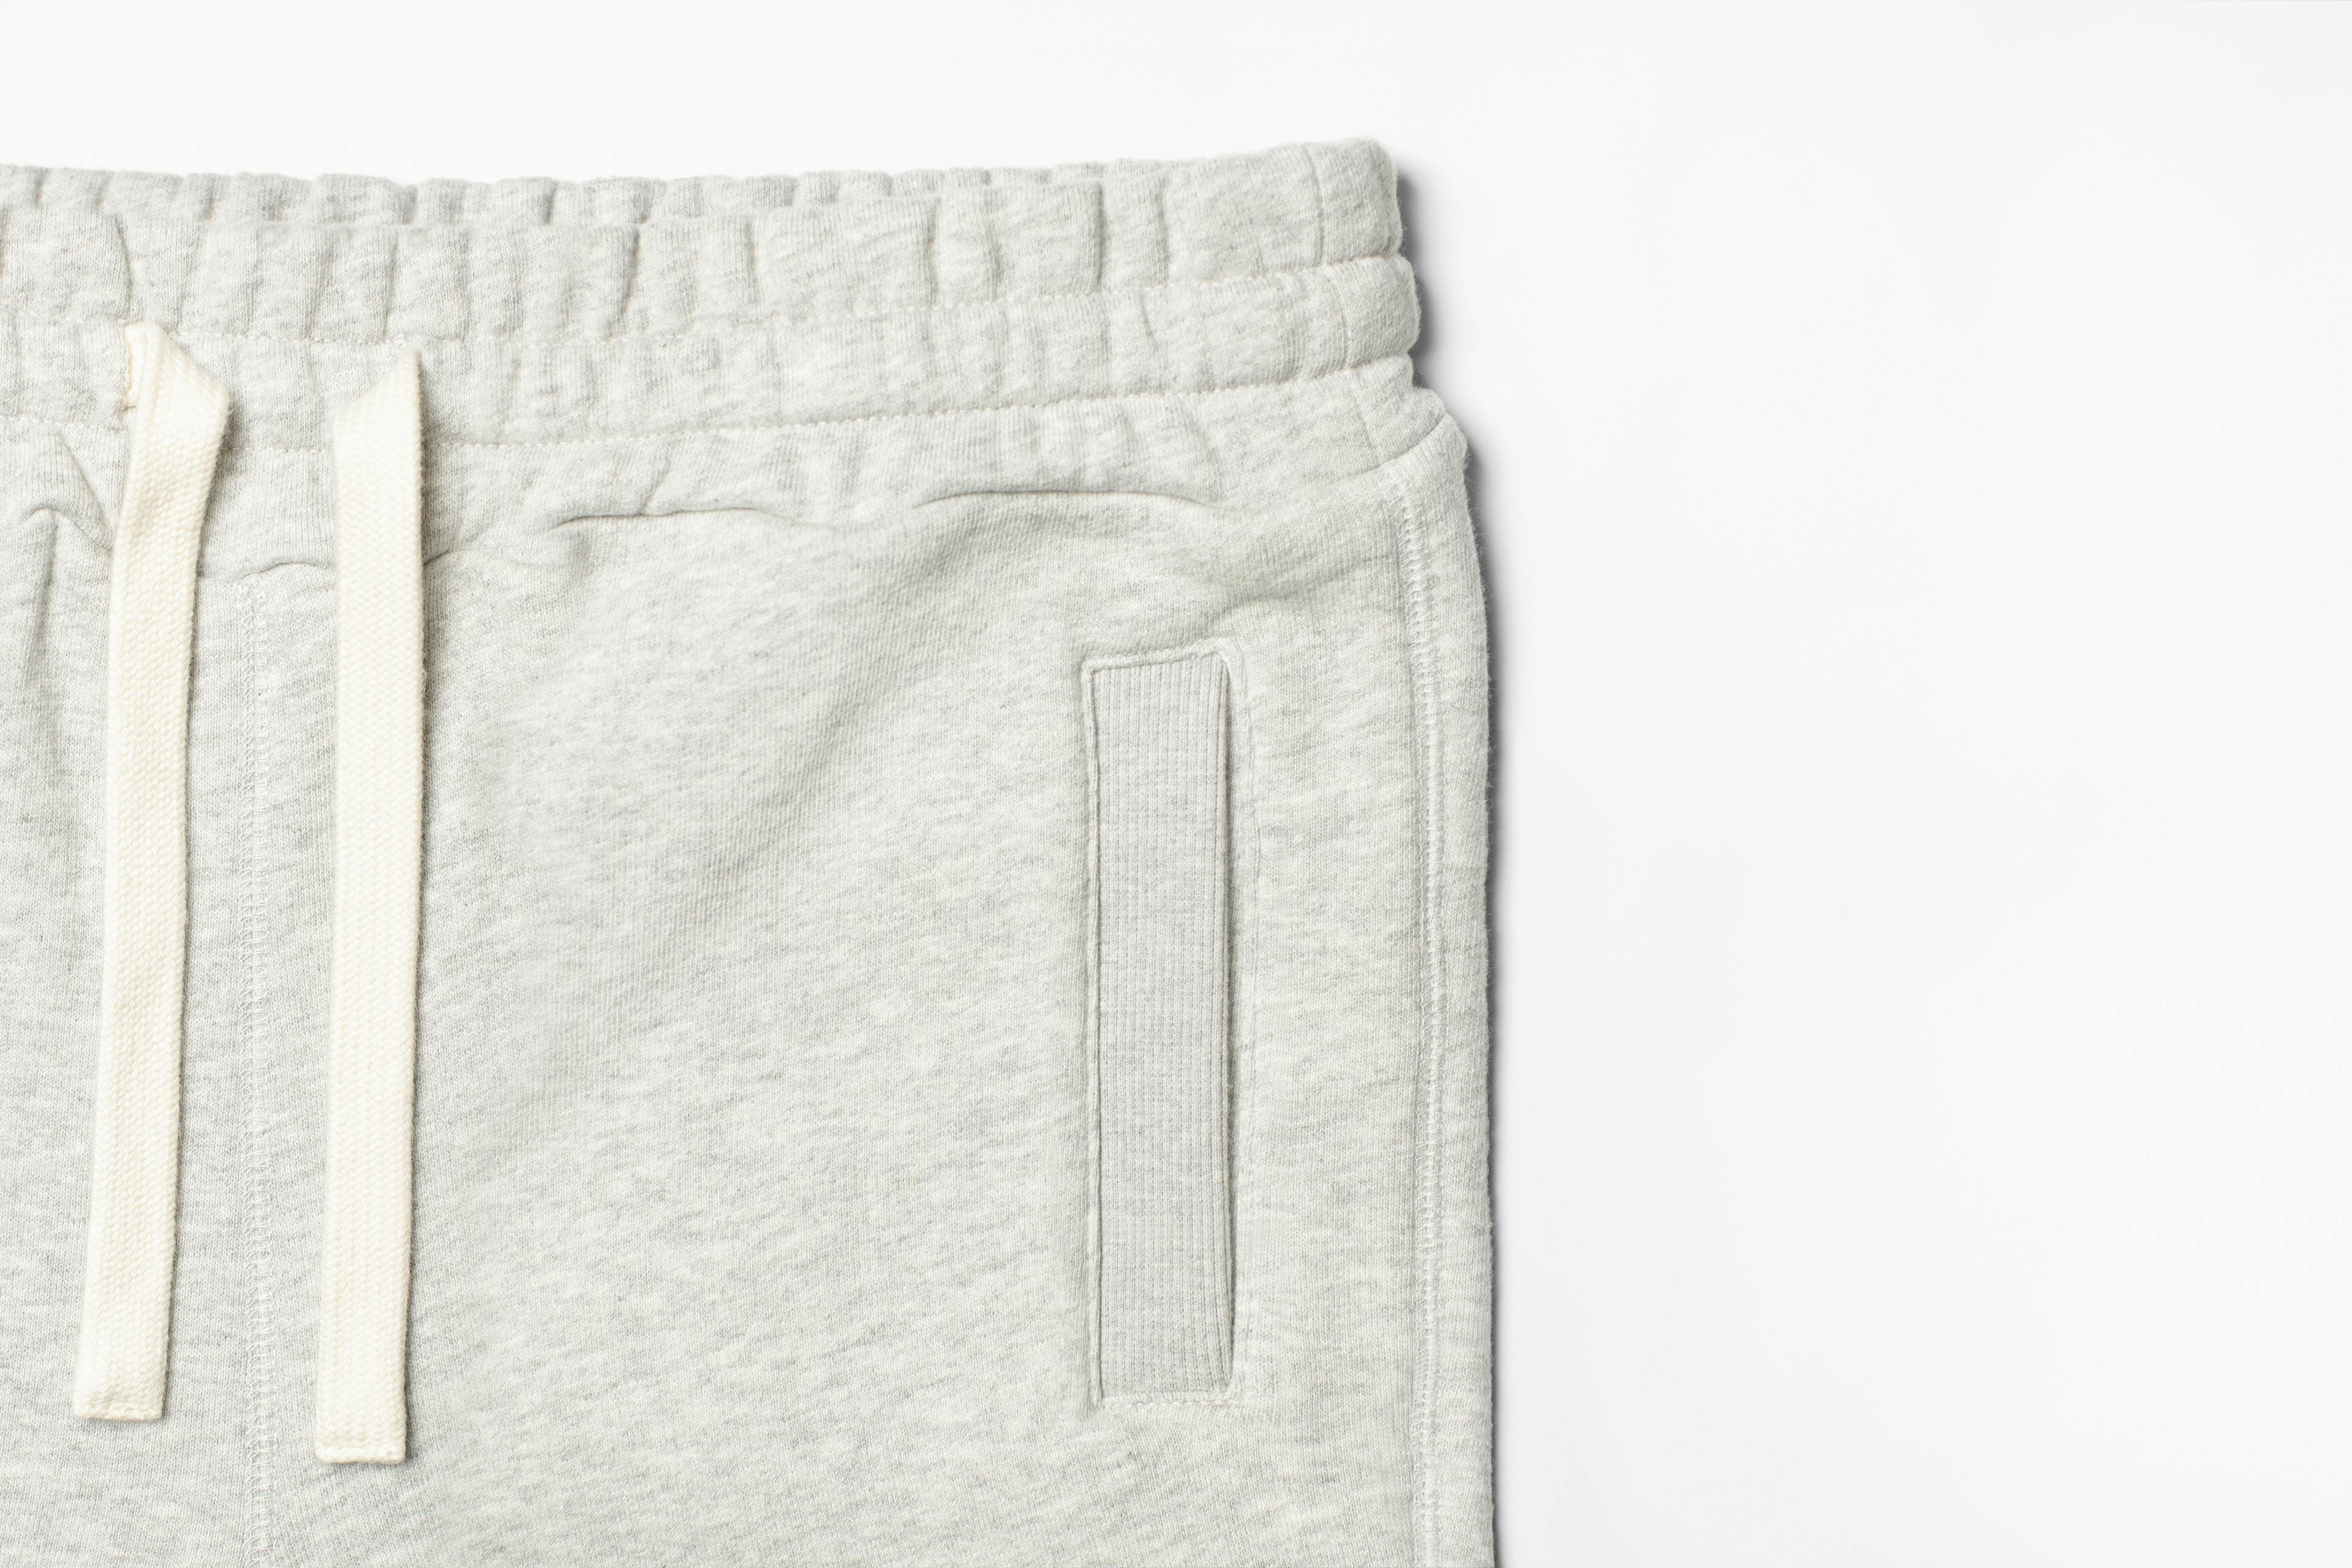 PDP Image: Lounge Sweatpants (M's Fit - Oatmeal) - 3:2 - Strings, Zoomed